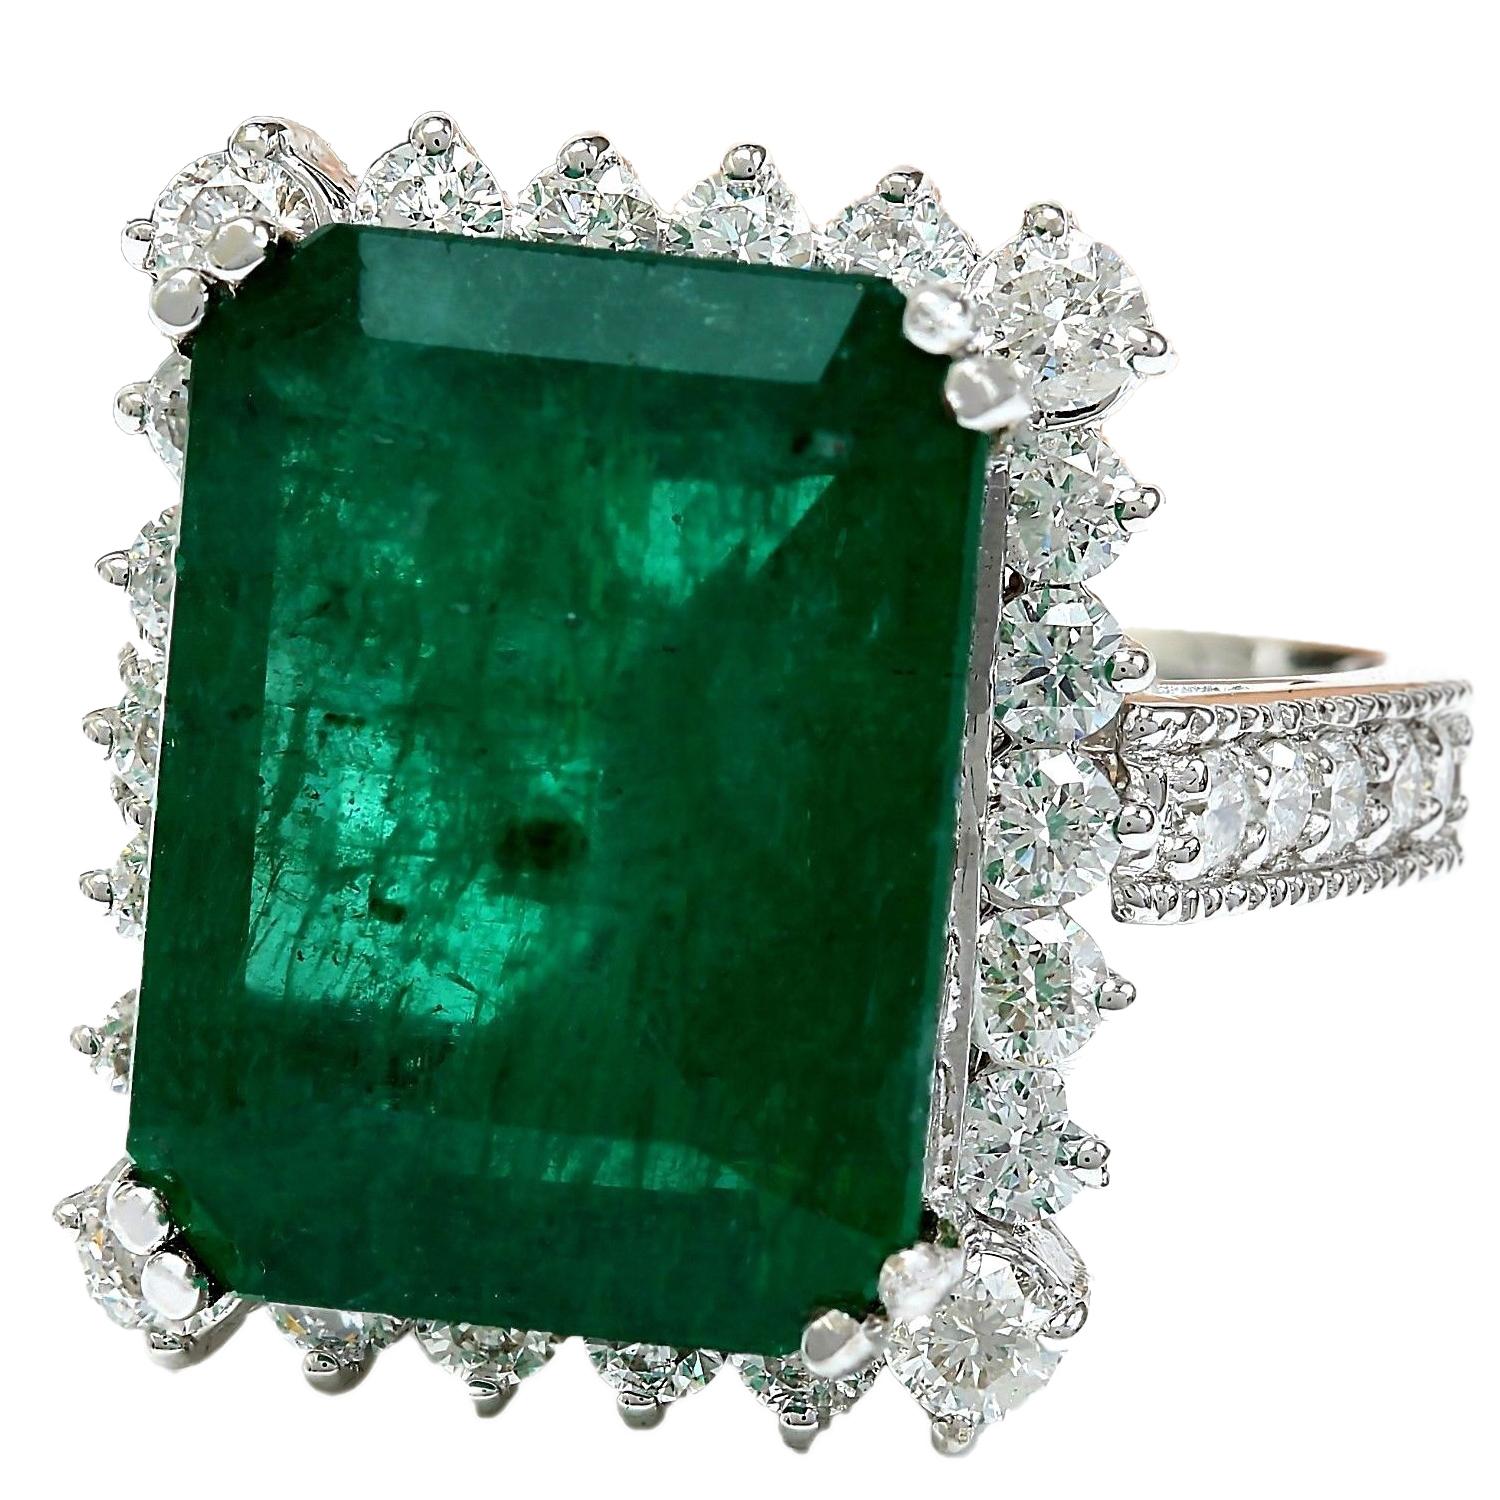 11.13 Carat  Emerald 18K Solid White Gold Diamond Ring
Item Type: Ring
Item Style: Cocktail
Material: 18K White Gold
Mainstone: Emerald
Stone Color: Green
Stone Weight: 9.58 Carat
Stone Shape: Emerald
Stone Quantity: 1
Stone Dimensions: 16.42x12.35